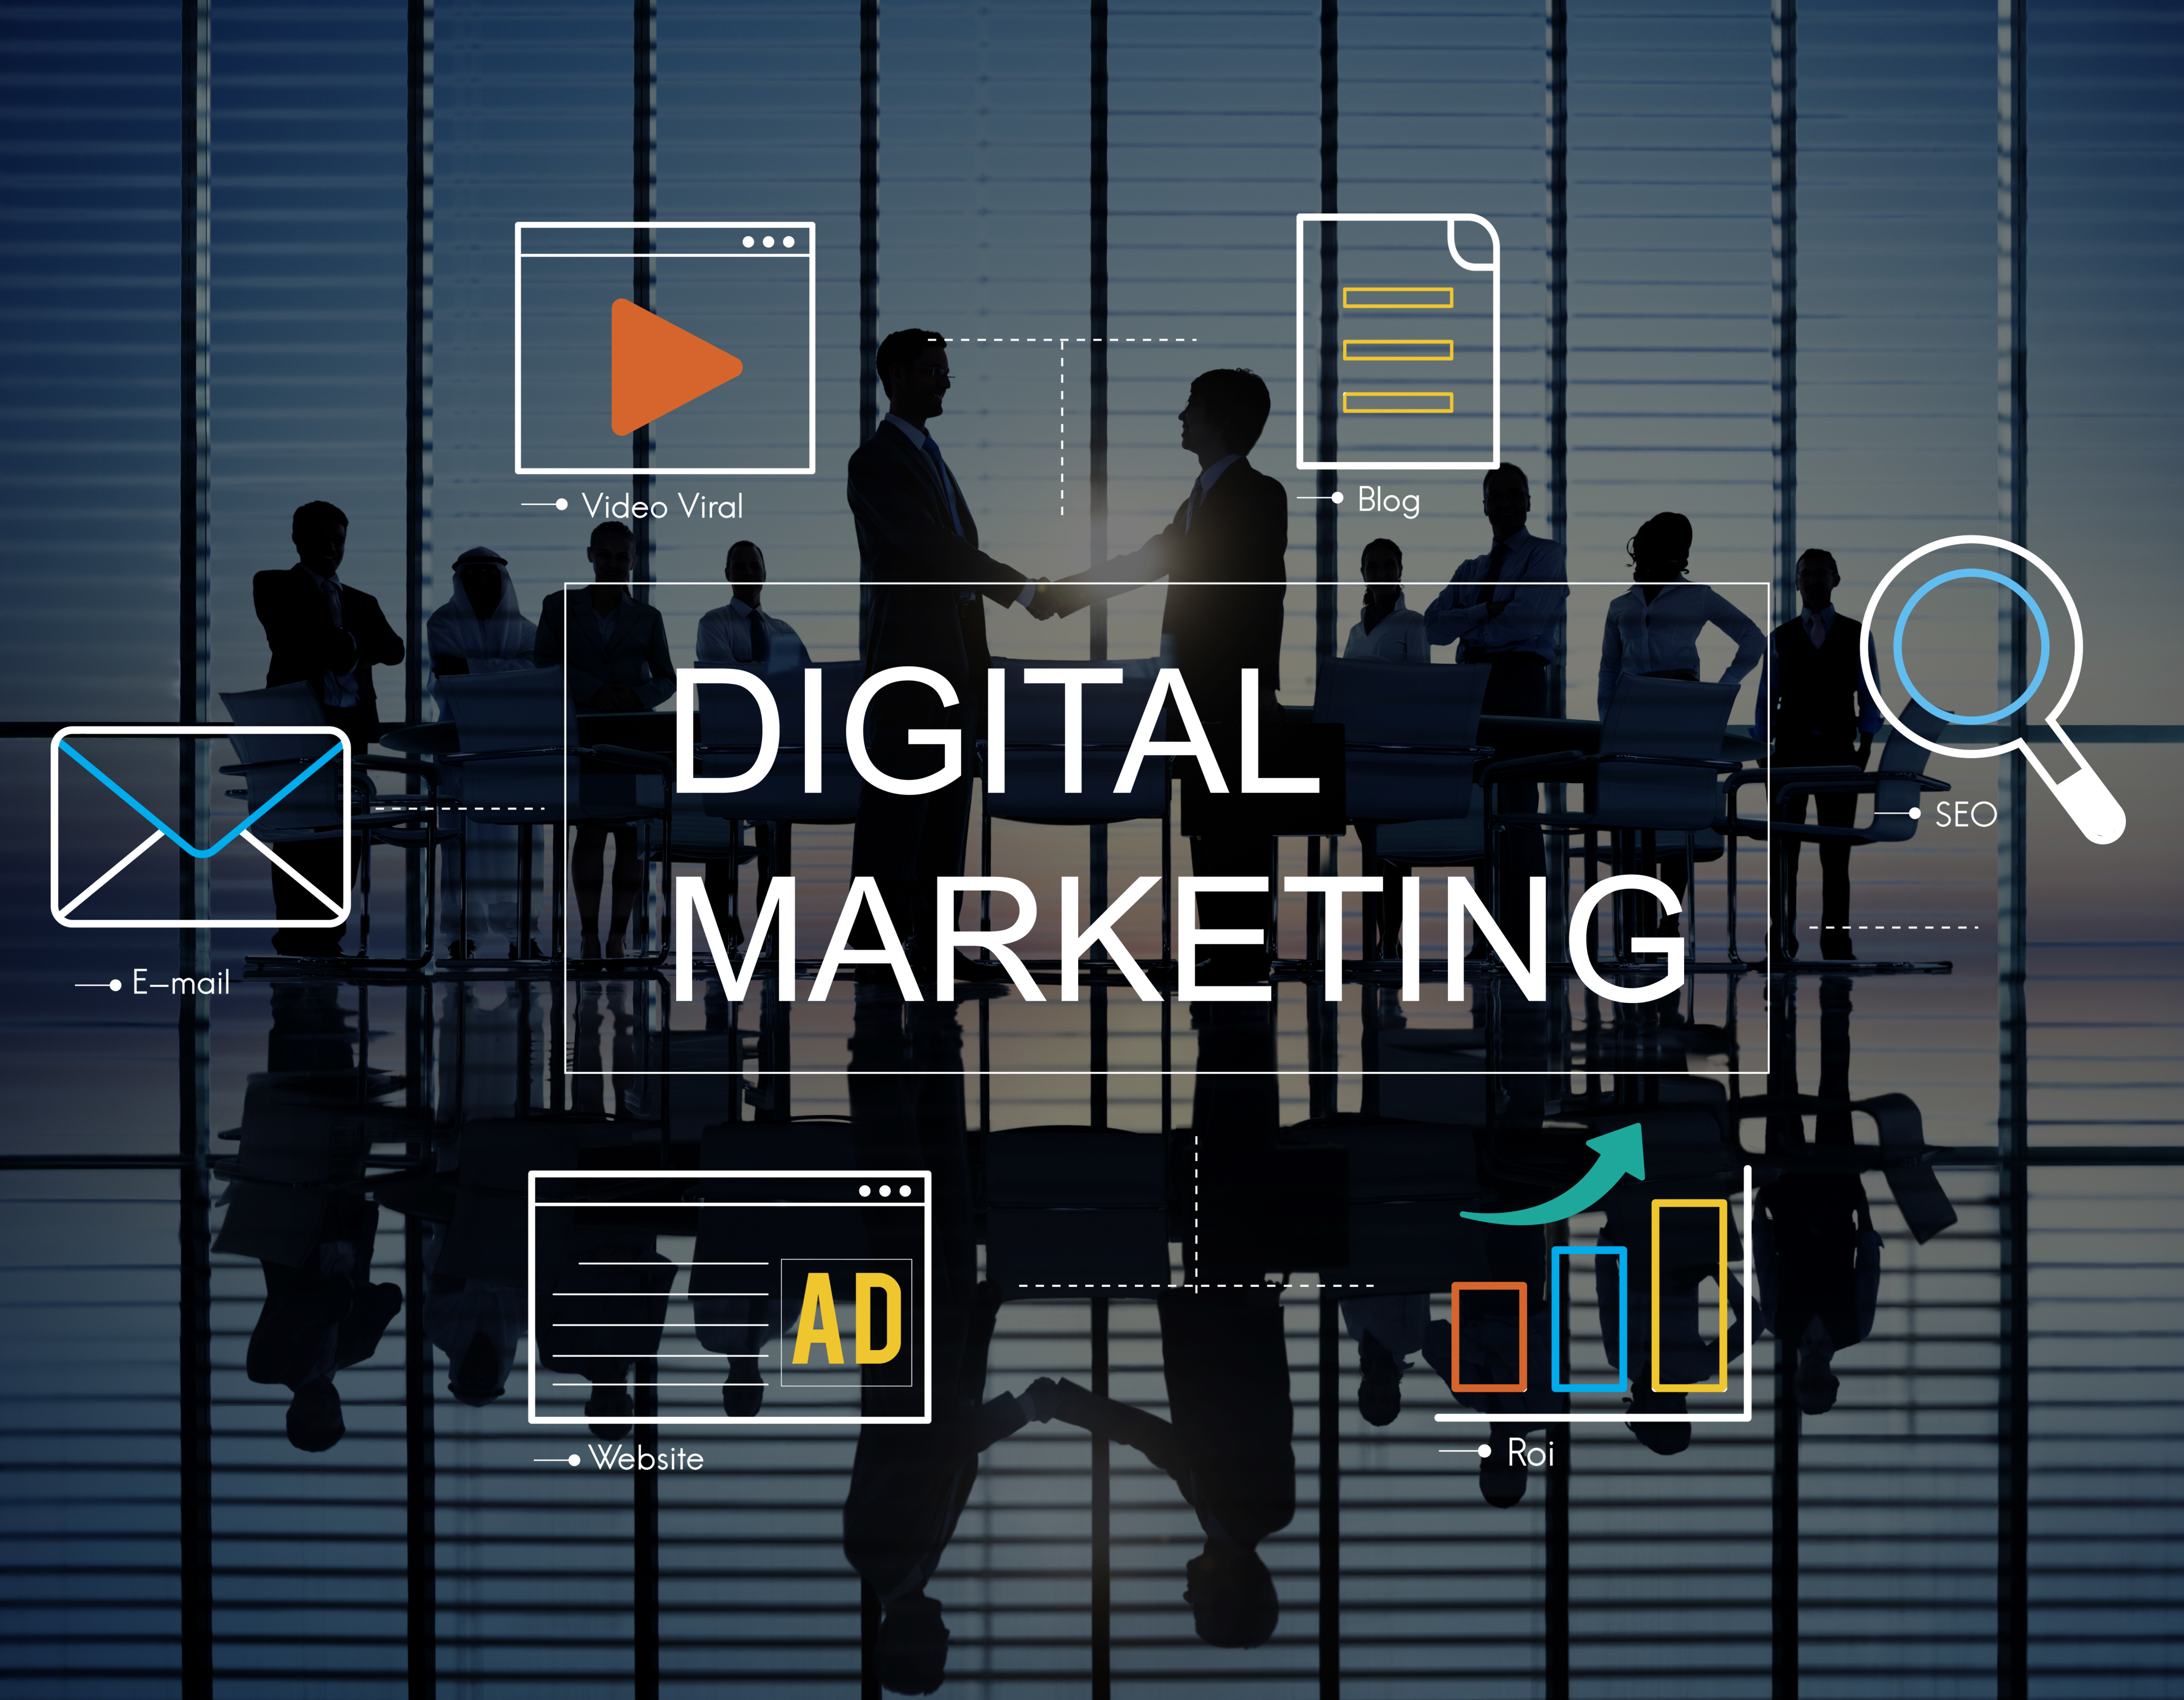 Why is Digital Marketing Important to Your Business?